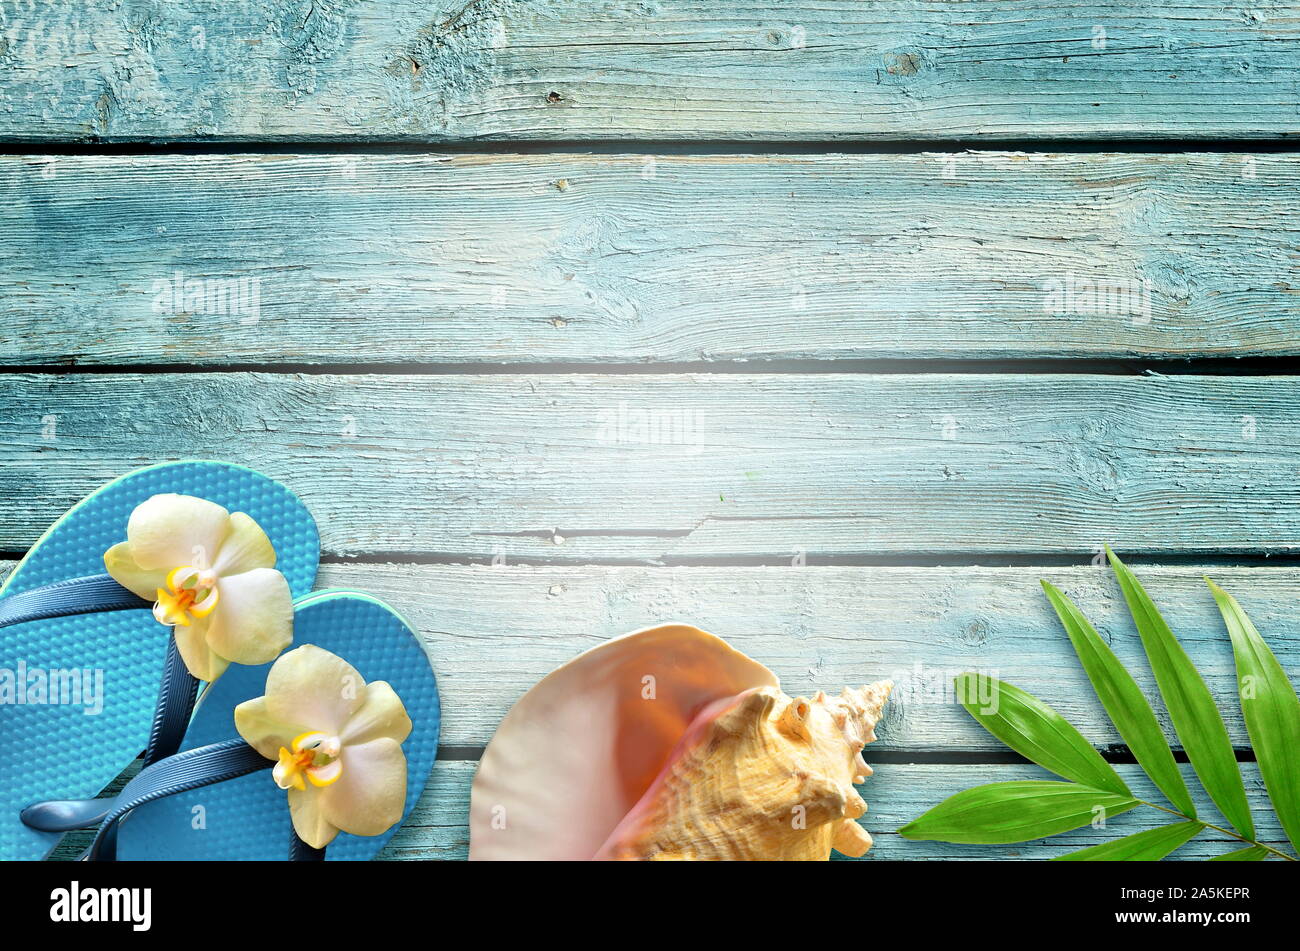 Summer flat lay background. Tropical palm leaves, flip flops and flower on old blue wooden background. Stock Photo